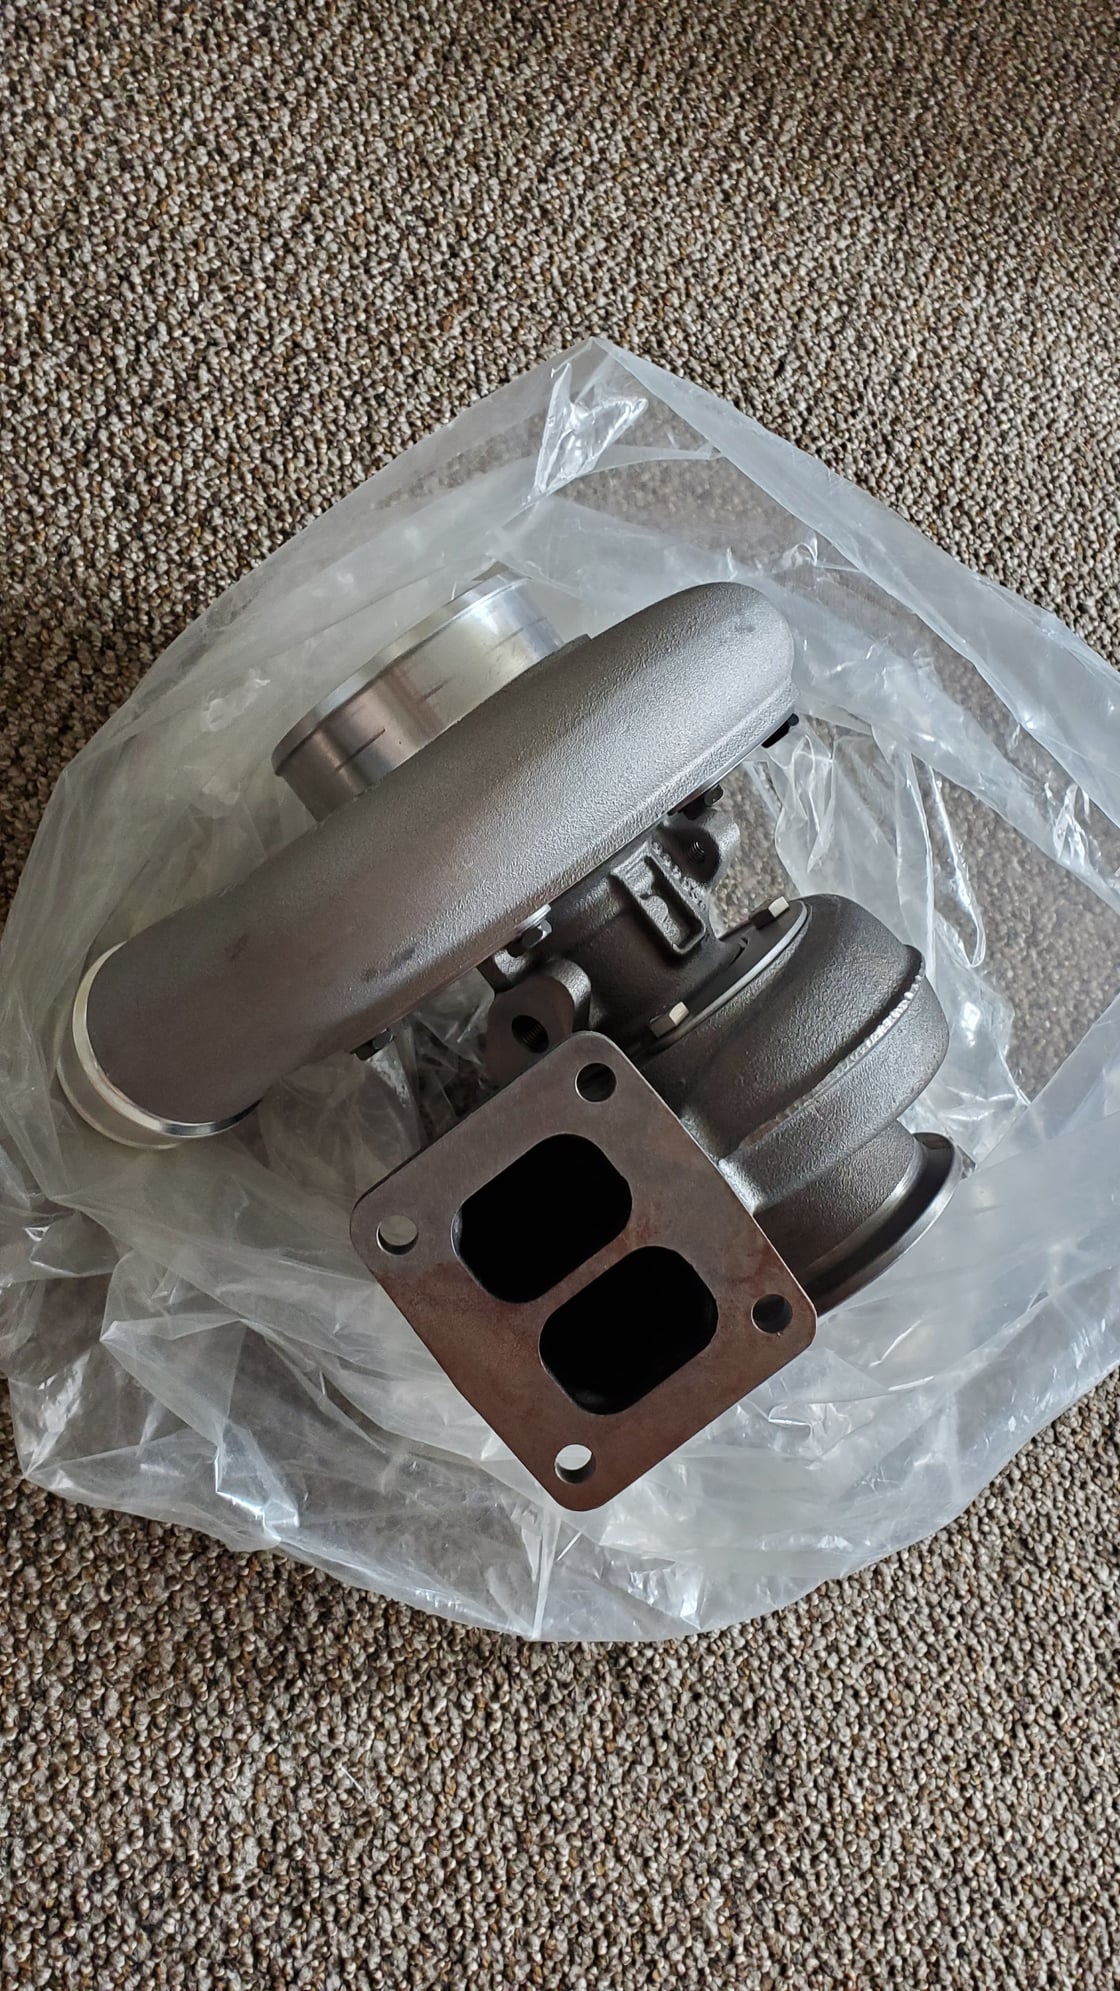 Engine - Power Adders - Borg Warner S366SXE 1.0a/r - New - All Years Any Make All Models - New Port Richey, FL 34655, United States